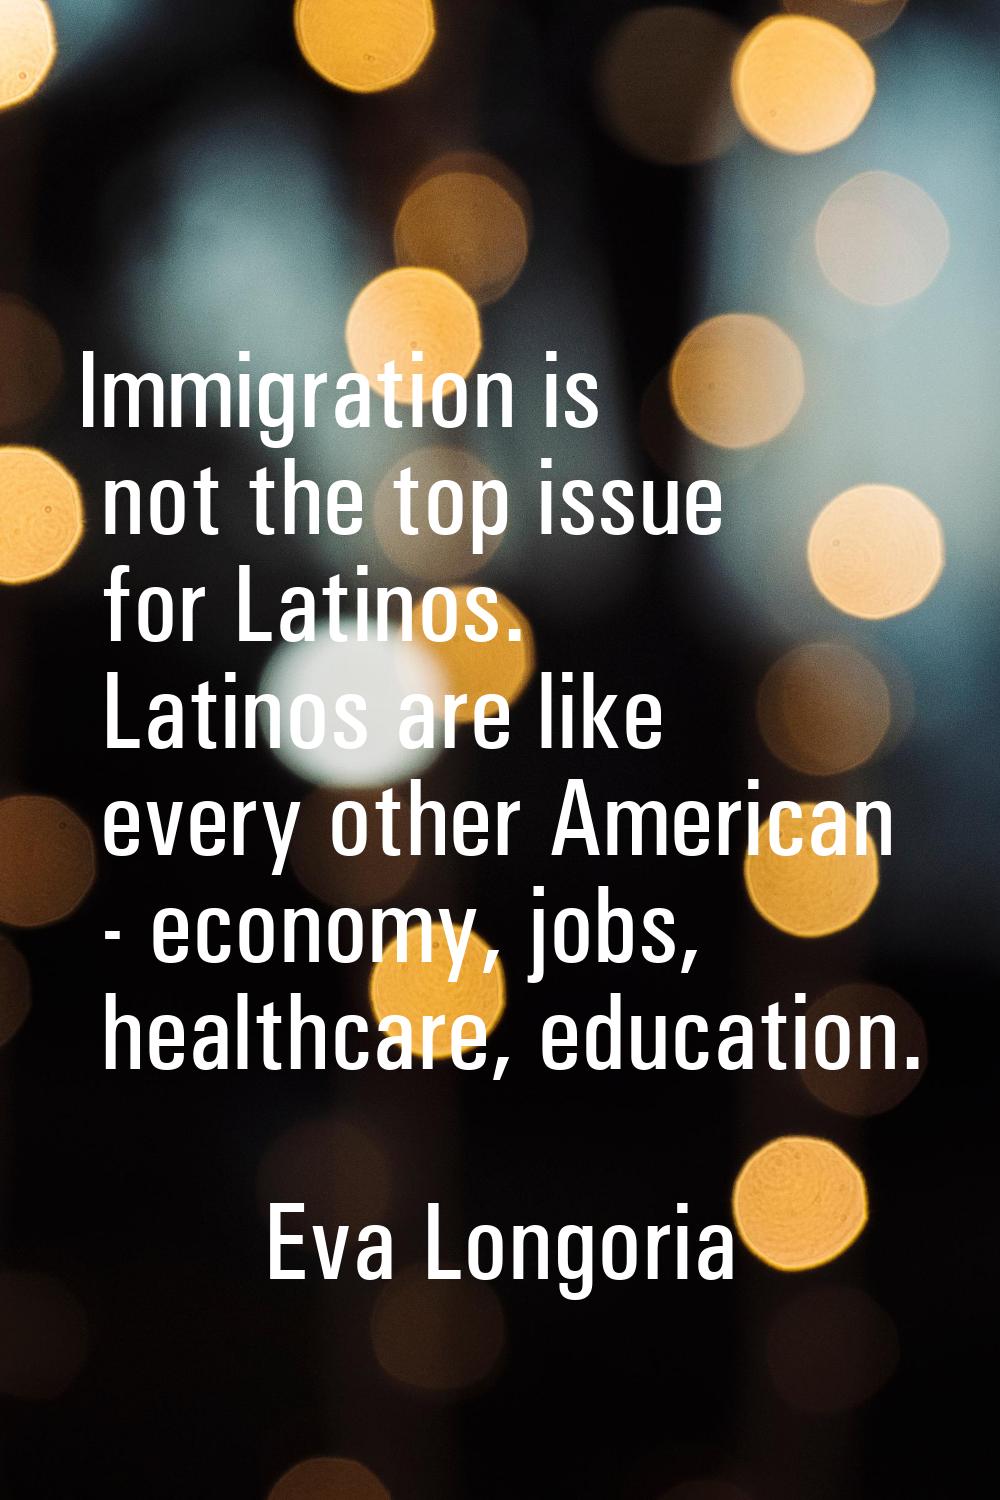 Immigration is not the top issue for Latinos. Latinos are like every other American - economy, jobs